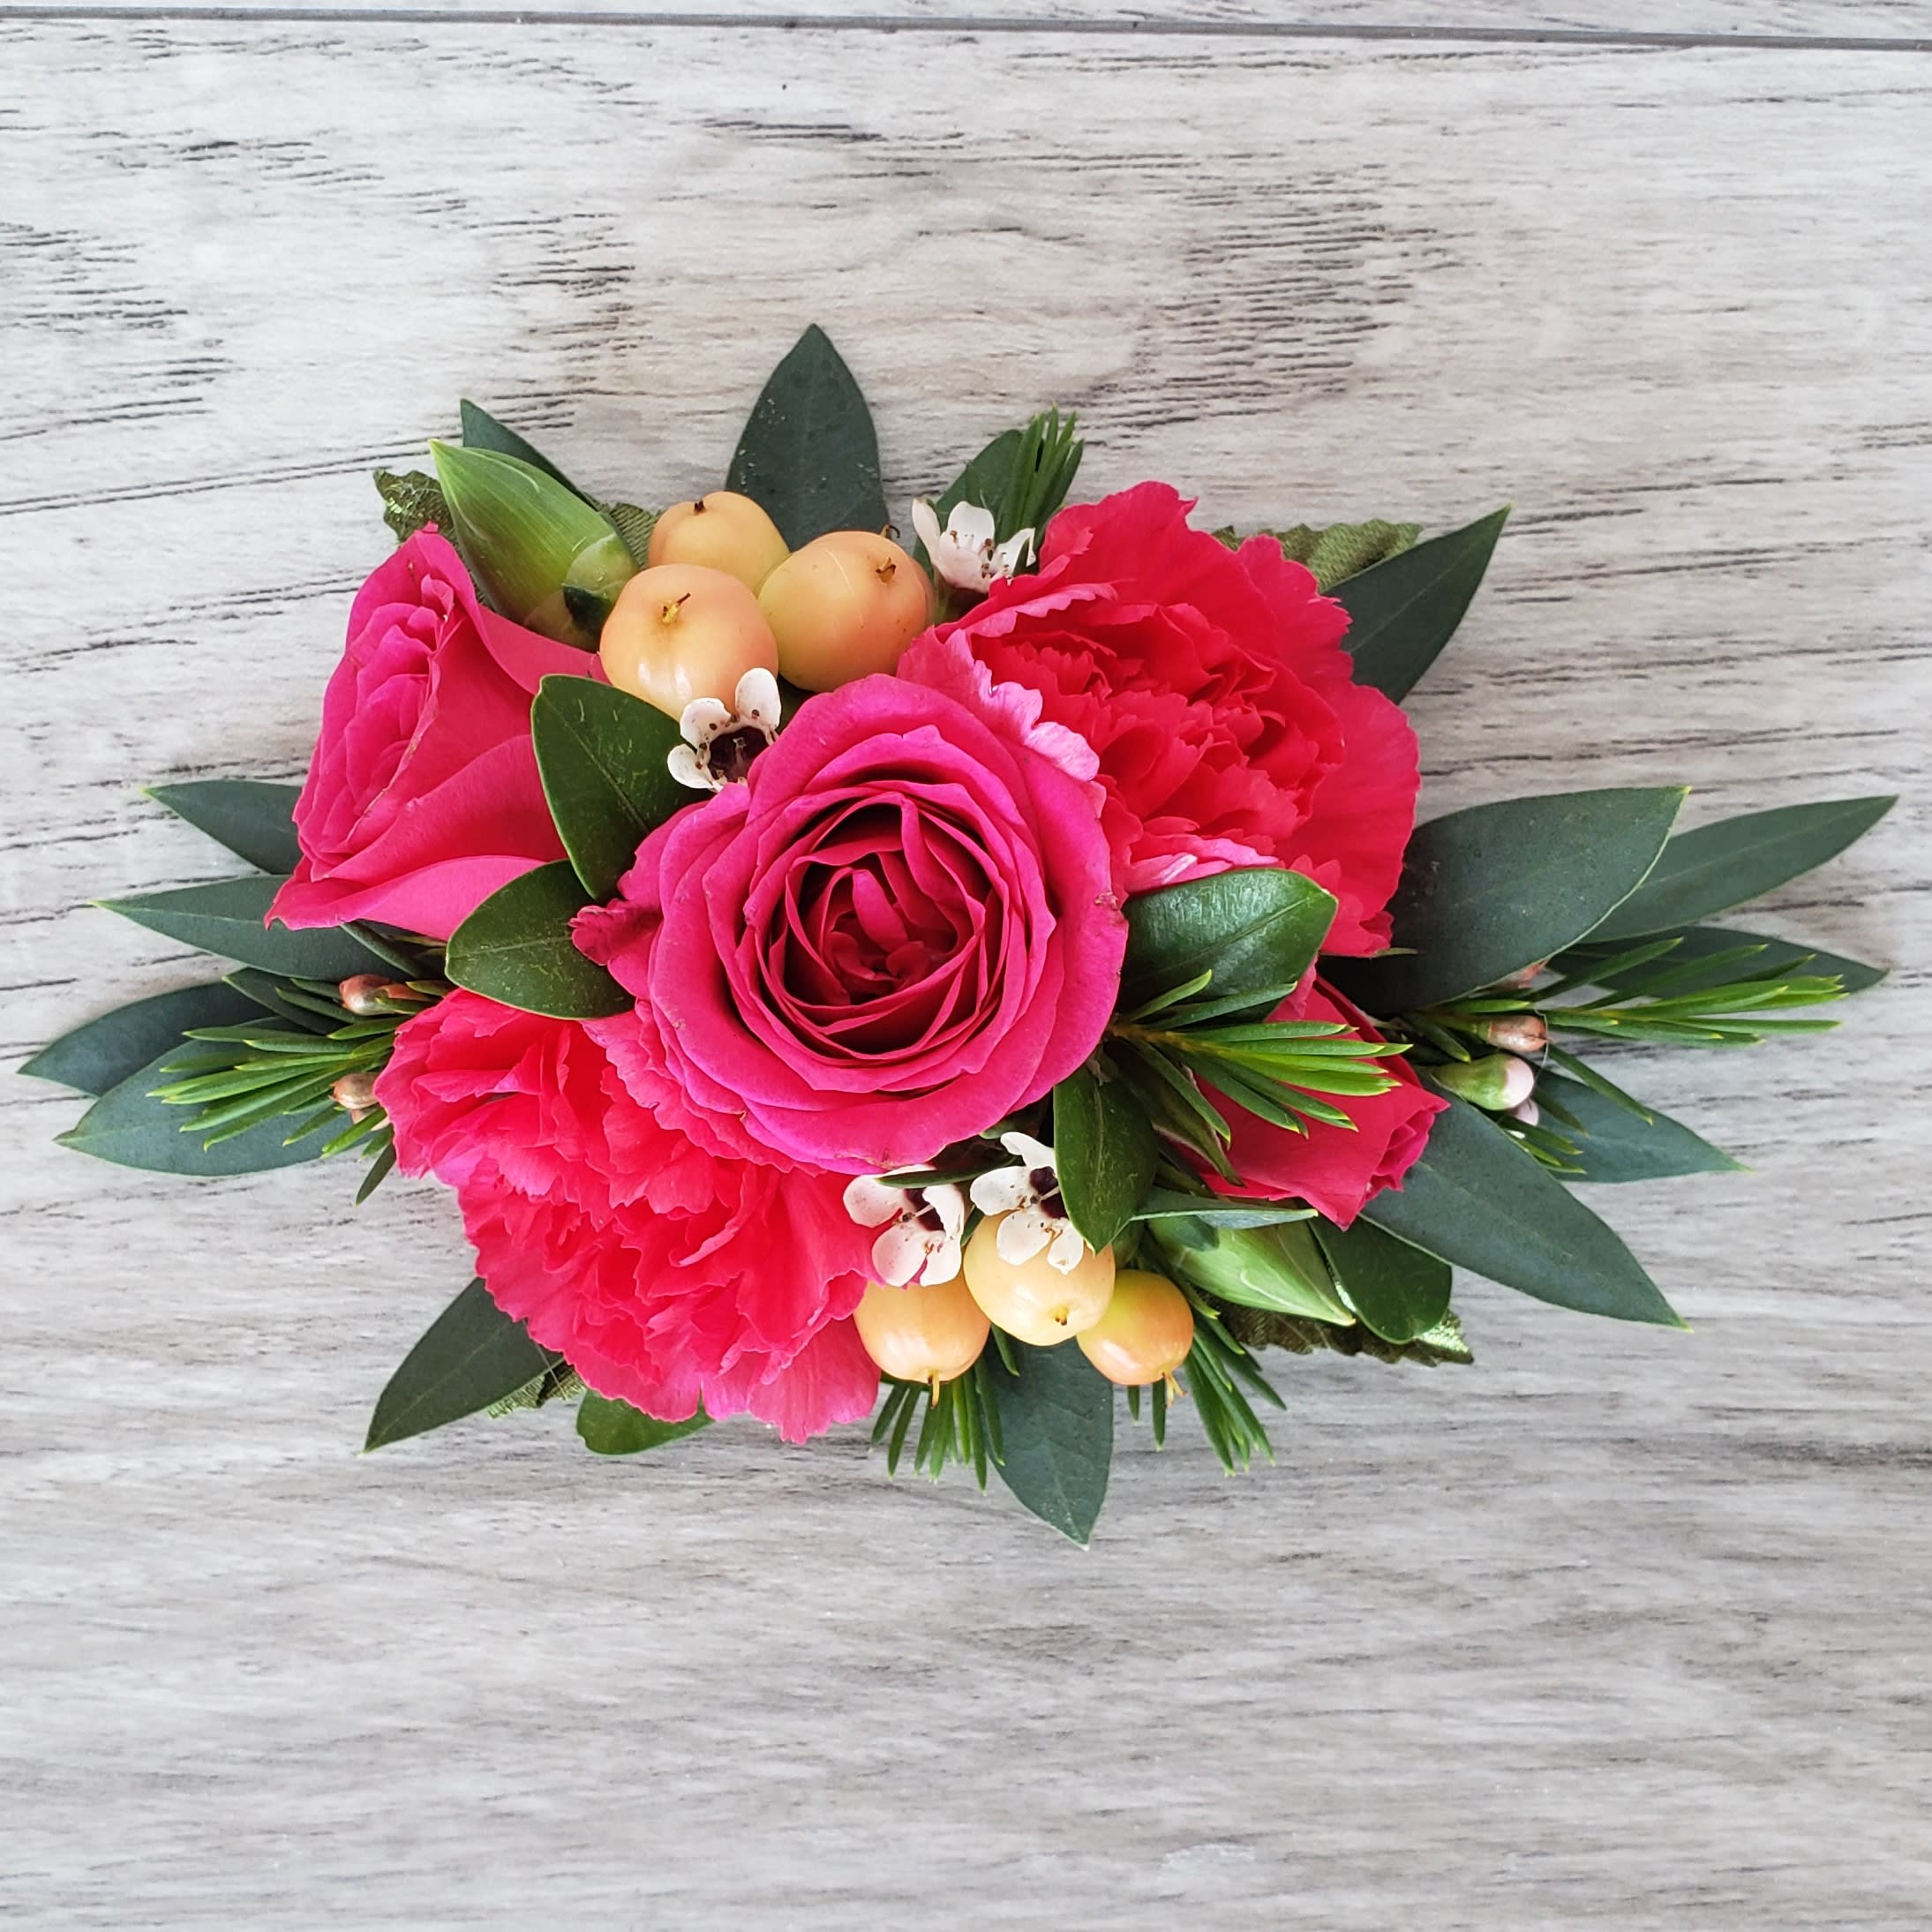 Hot Pink Petite Corsage - This corsage is more petite in size and features hot pink spray roses, peach hypericum, hot pink mini carnations and complementary greens and accent flower.If you would like to exchange the colors of the flowers please let us know and we will be happy to accommodate.